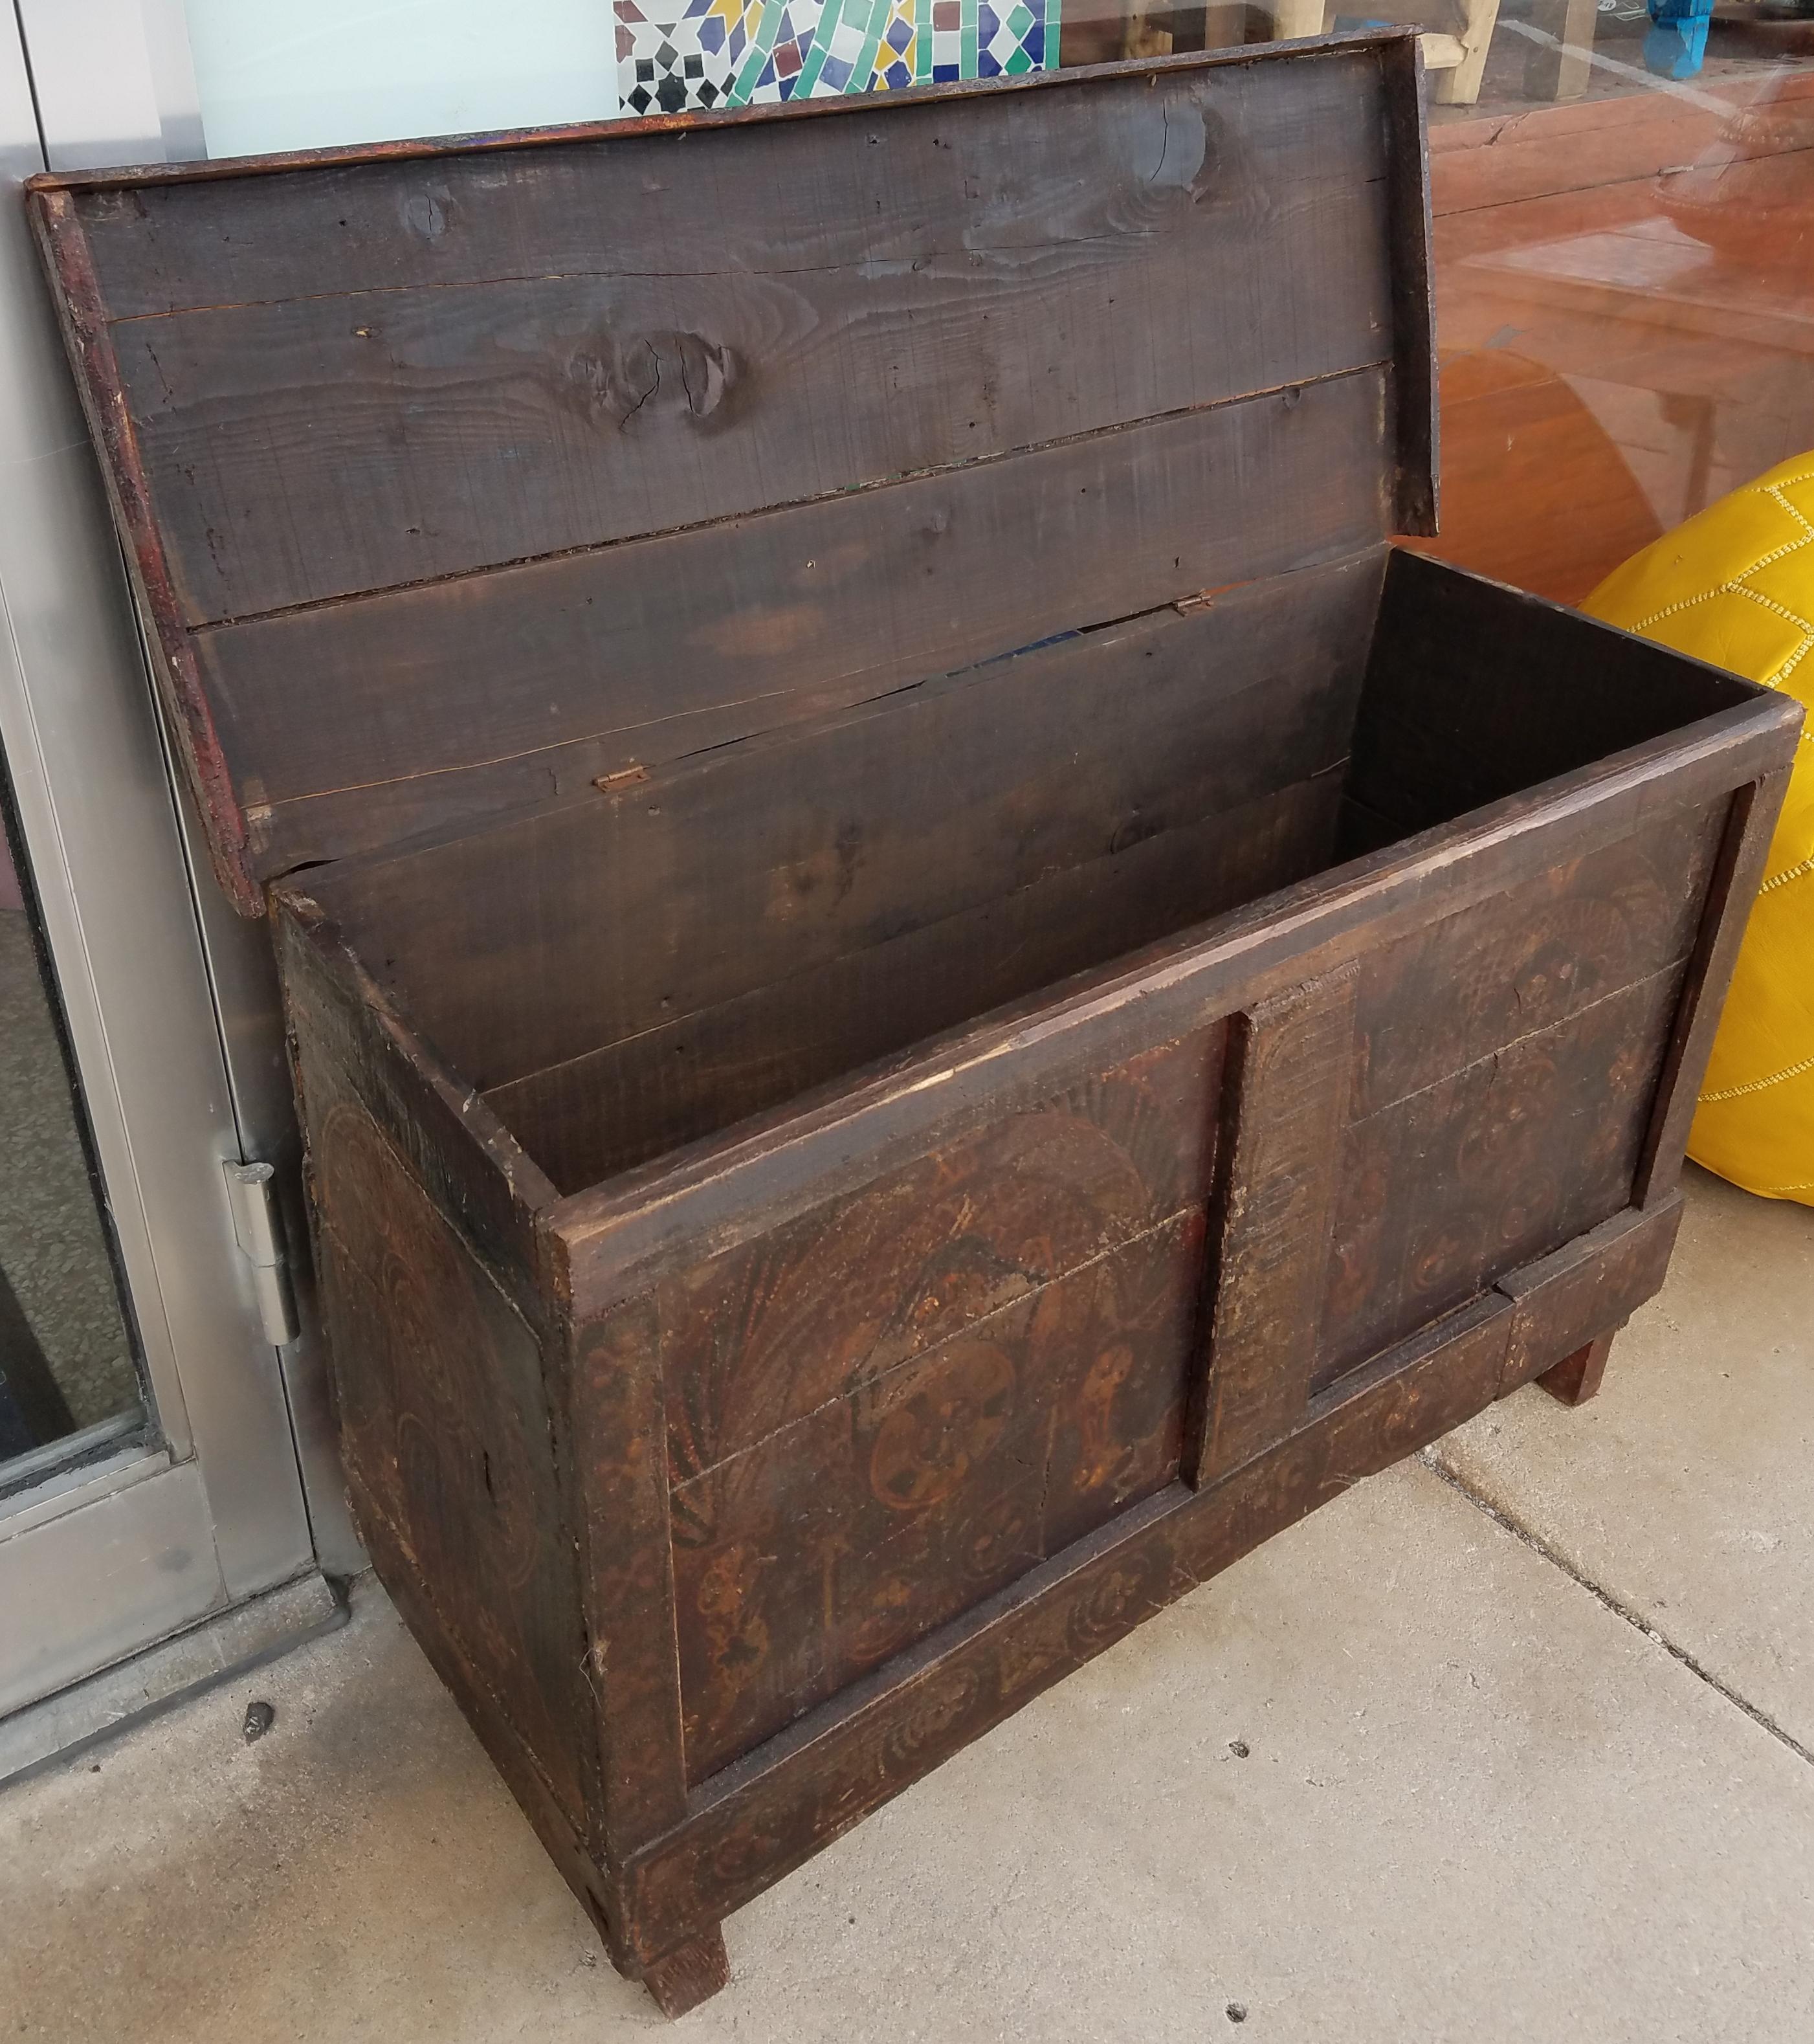 Moroccan Handmade Storage Trunk, Reclaimed Wood In Good Condition For Sale In Orlando, FL